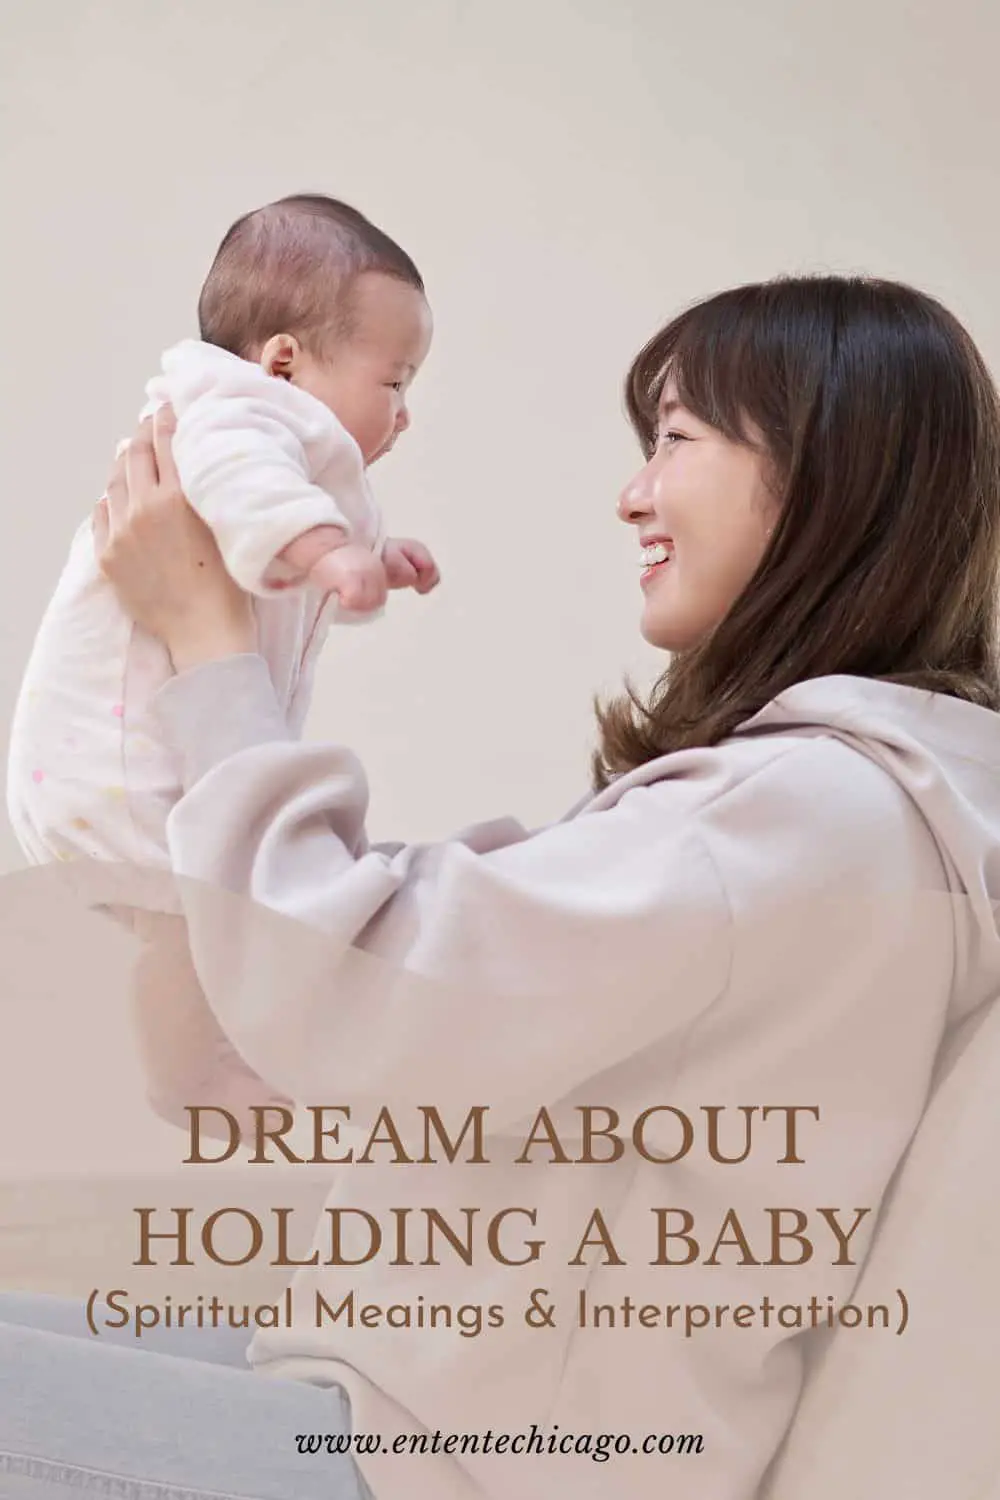 What Does It Mean To Dream Of Holding A Baby?